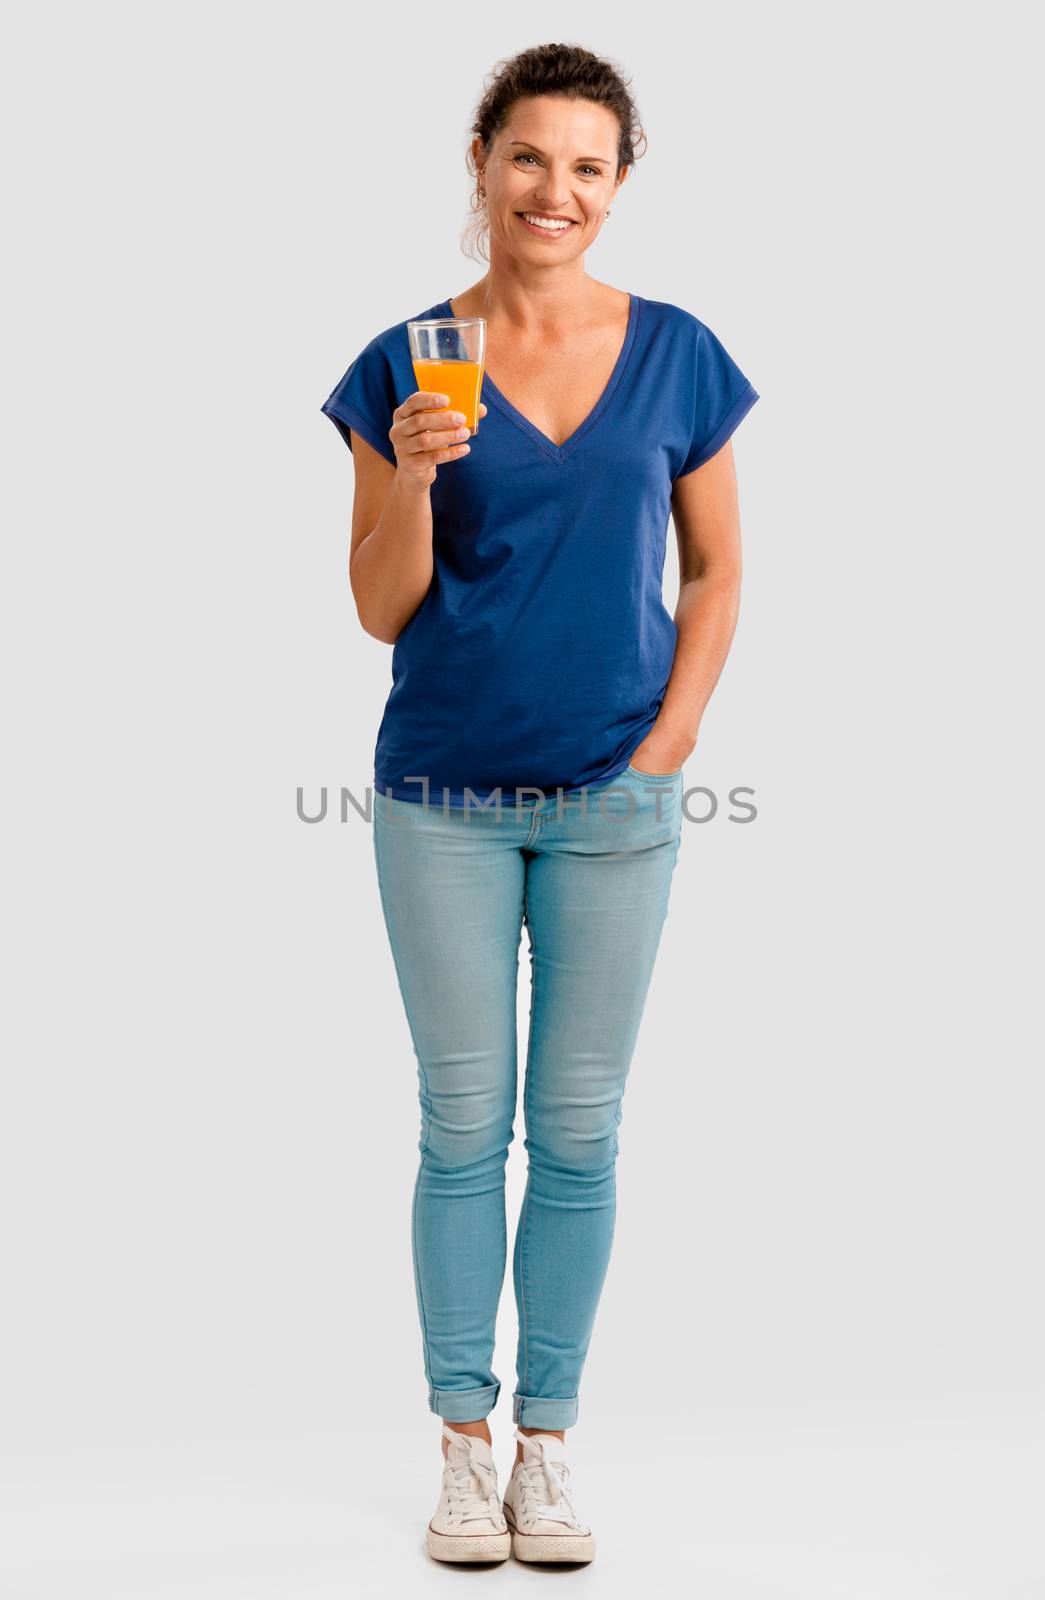 Middle aged woman holding a glass with orange juice